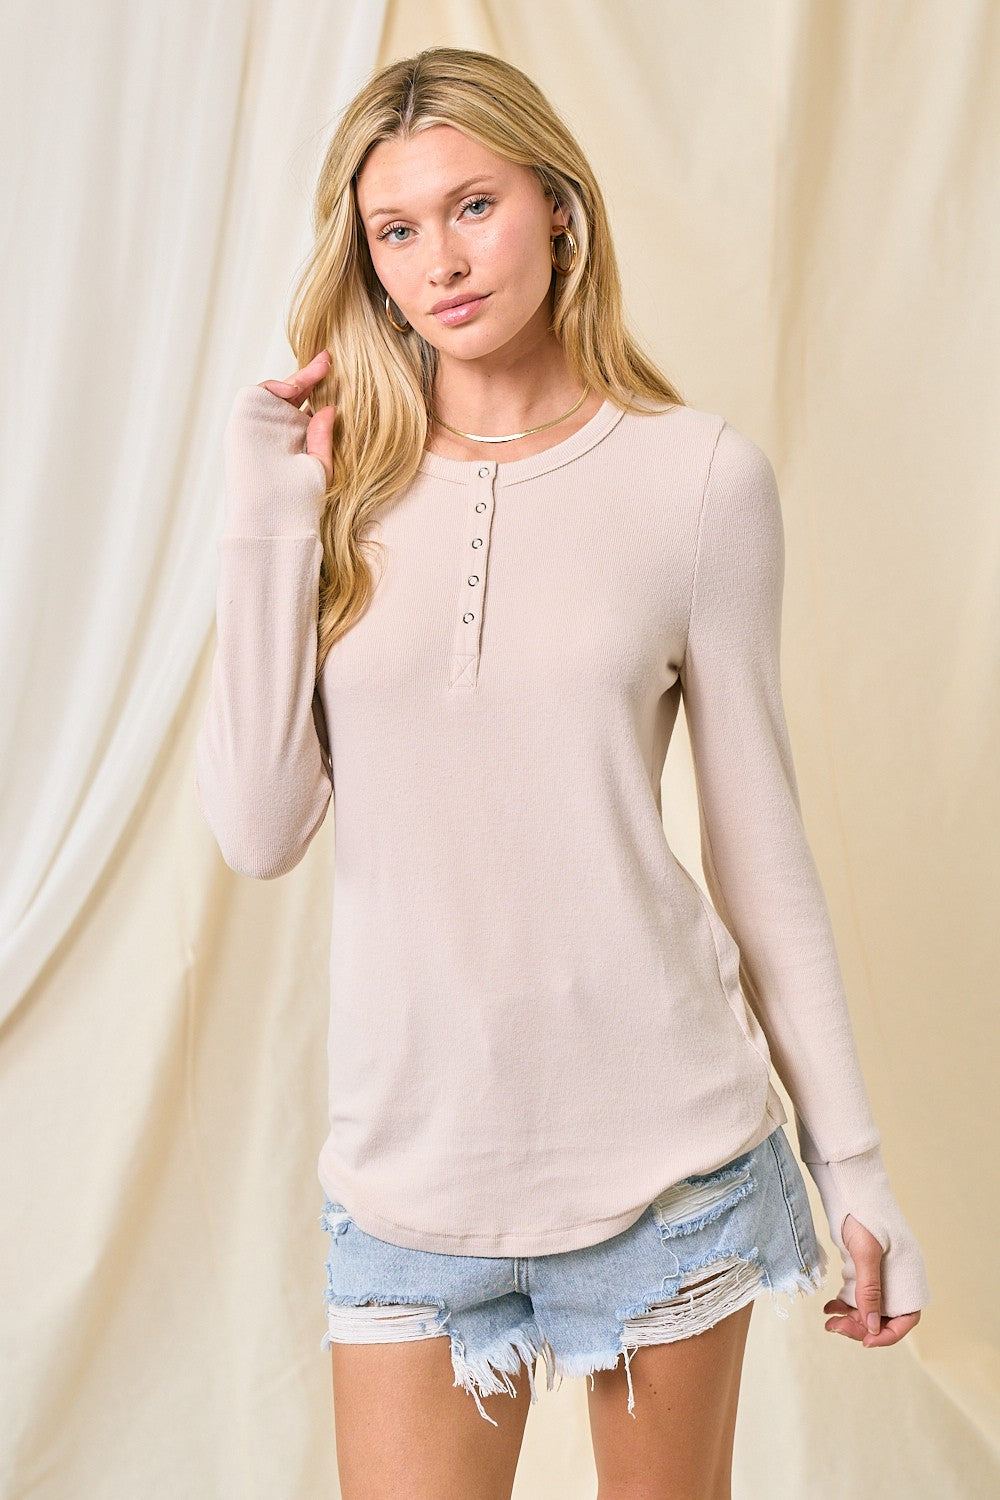 Light Blue Floral Long Sleeve Henley Maternity Top– PinkBlush